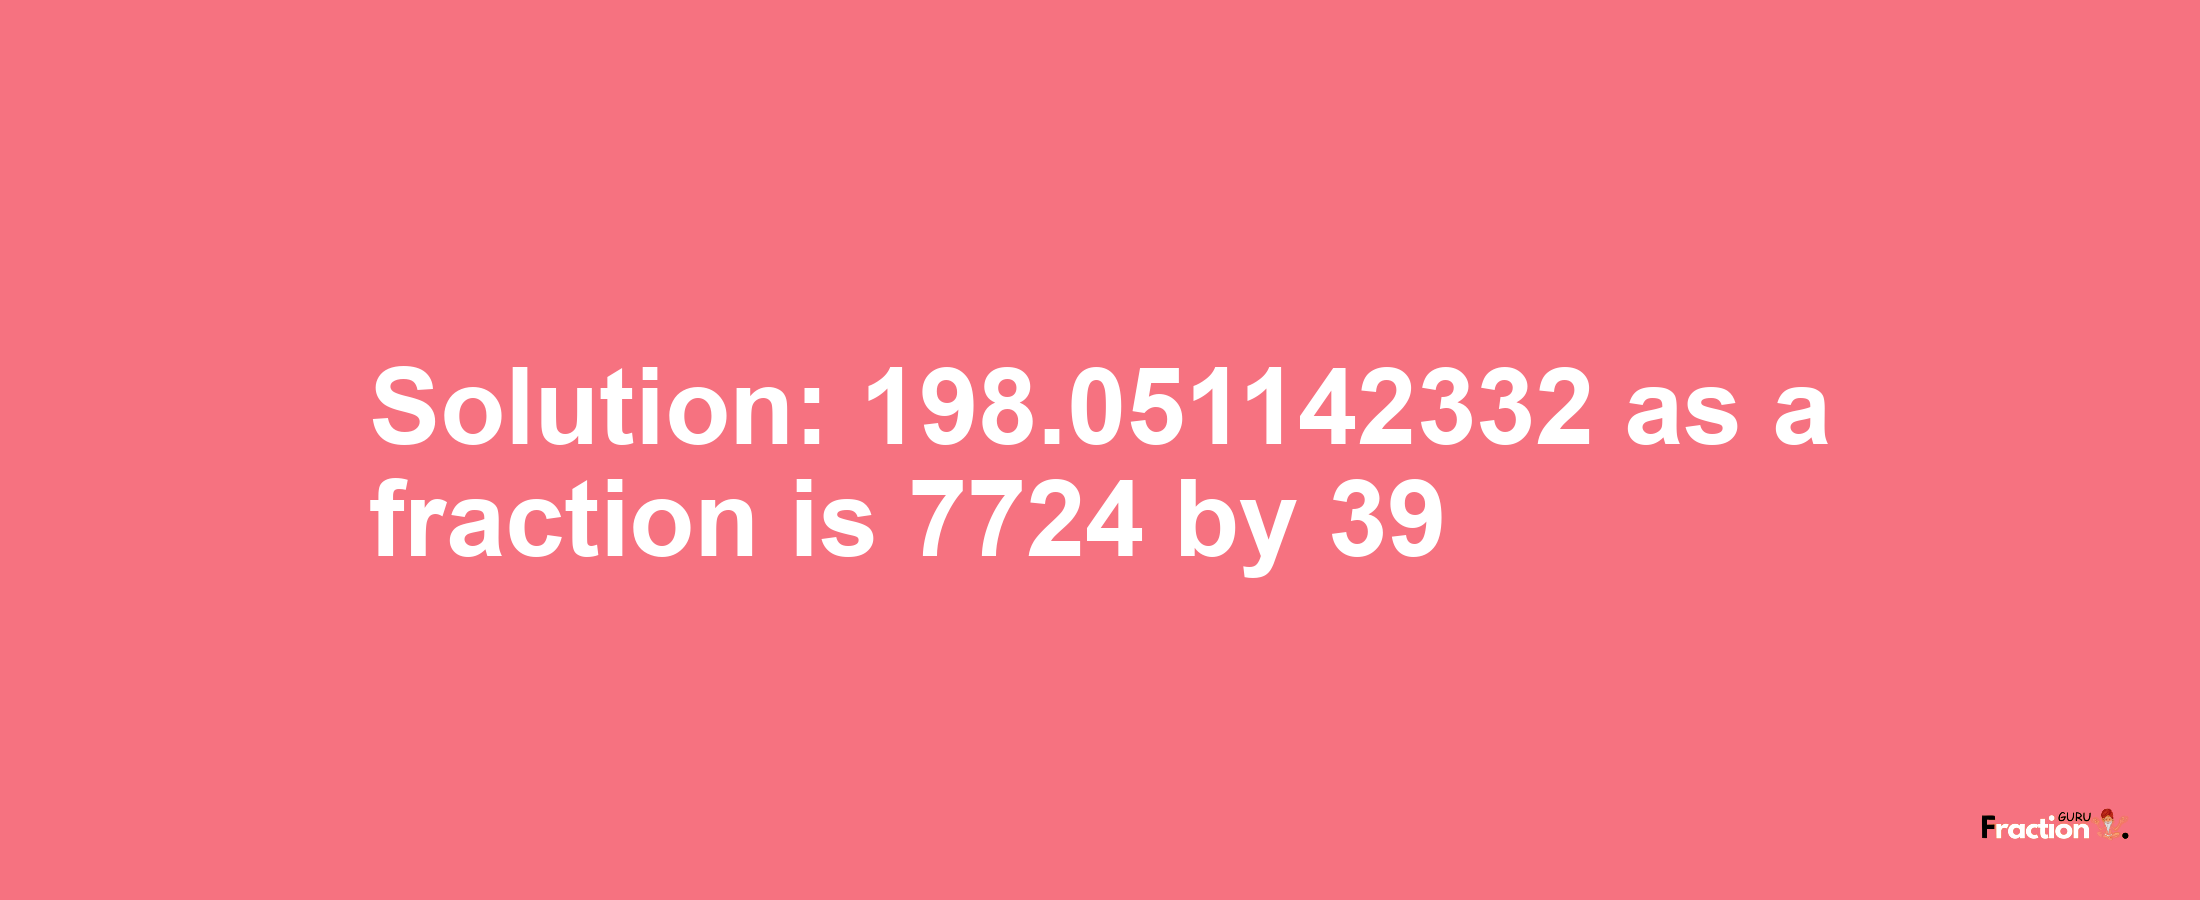 Solution:198.051142332 as a fraction is 7724/39